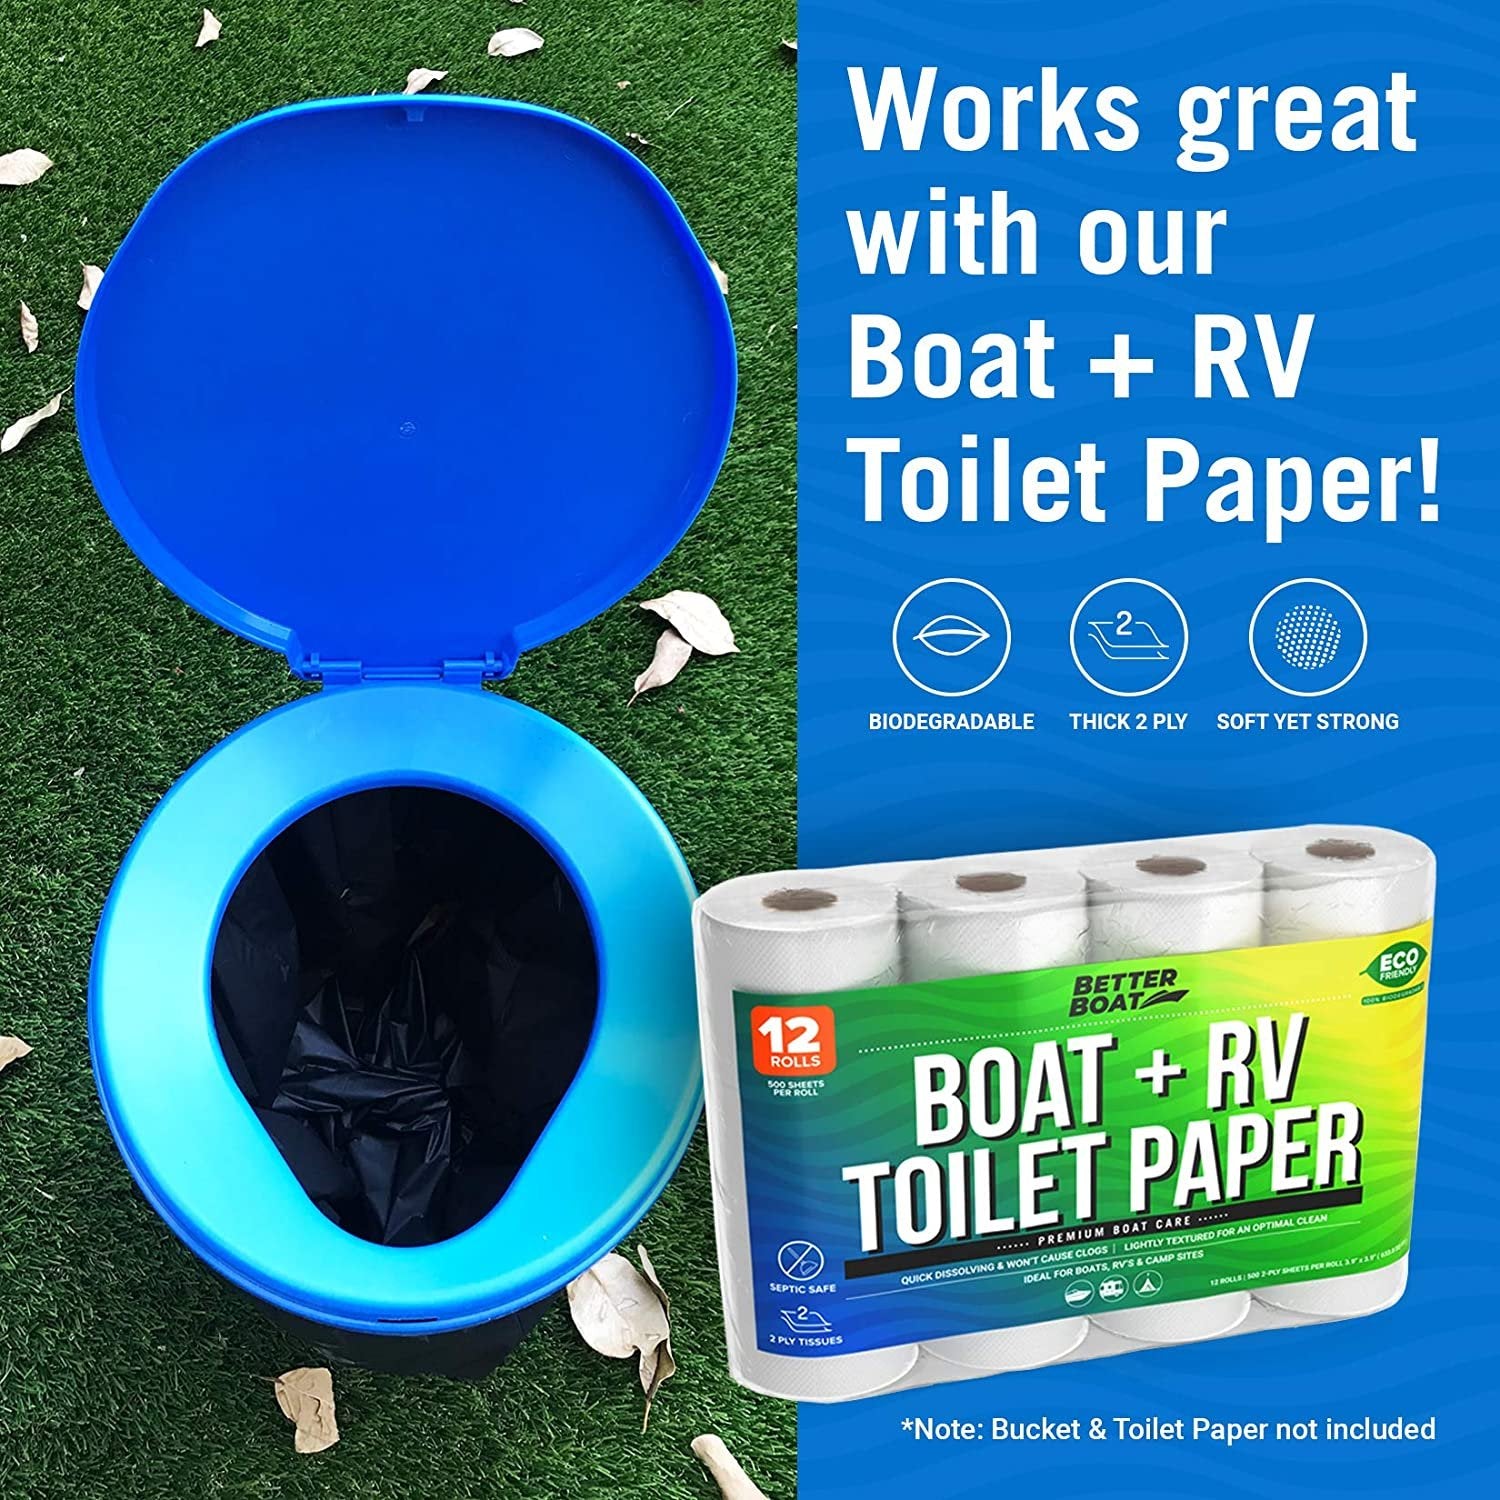 Portable Toilet for Camping Toilet Bucket Toilet Seat Set with Lid for Boating Outdoor Camp Travel Boat - Kit Potty Waste Bags and Case Cover - 5 Gal & 8 Gallon Buckets Emergency Bathroom for Adults